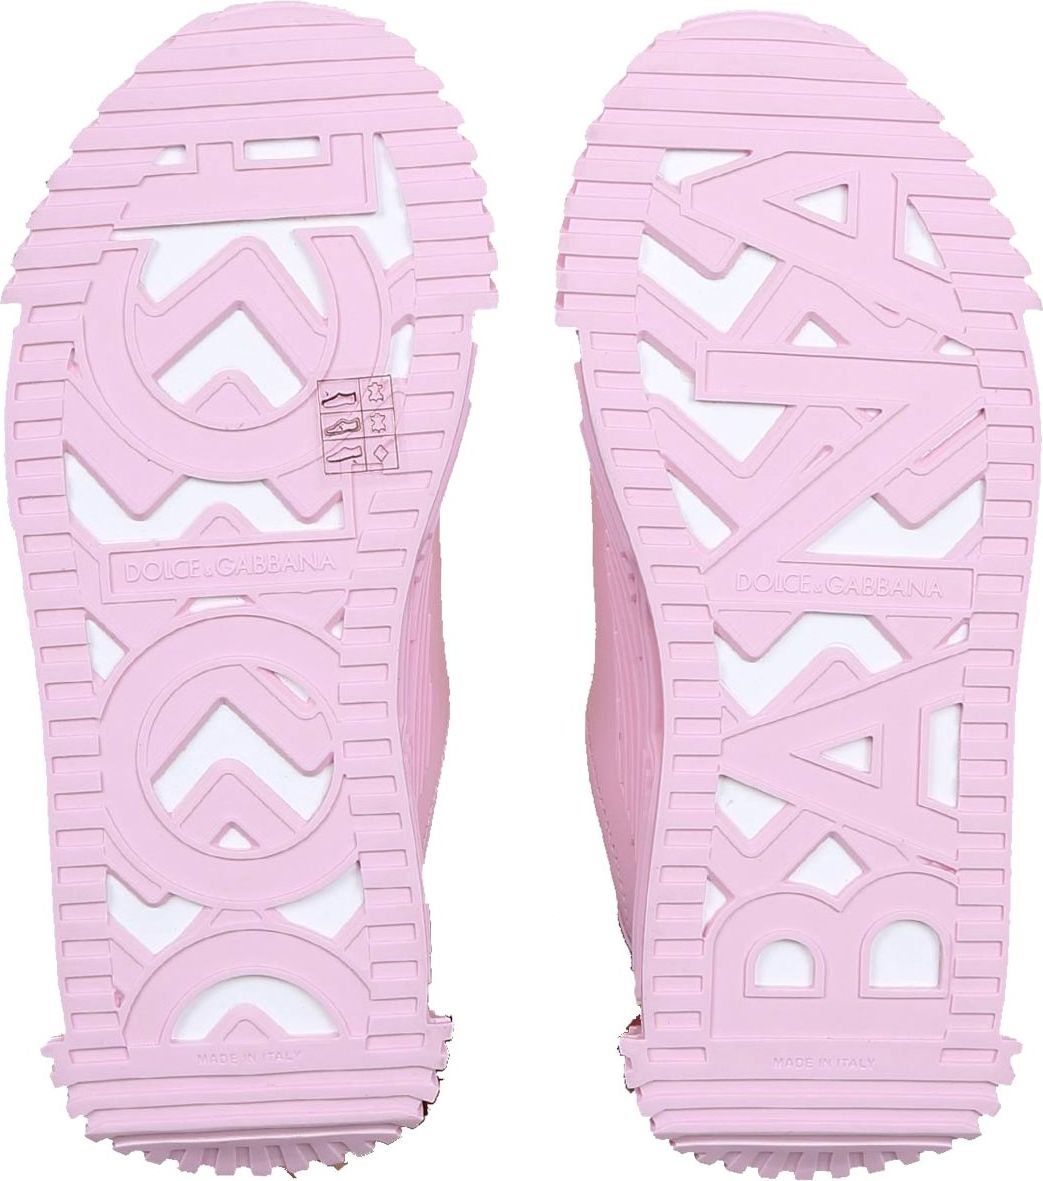 Dolce & Gabbana Dolce & gabbana sneakers in pink color leather Roze